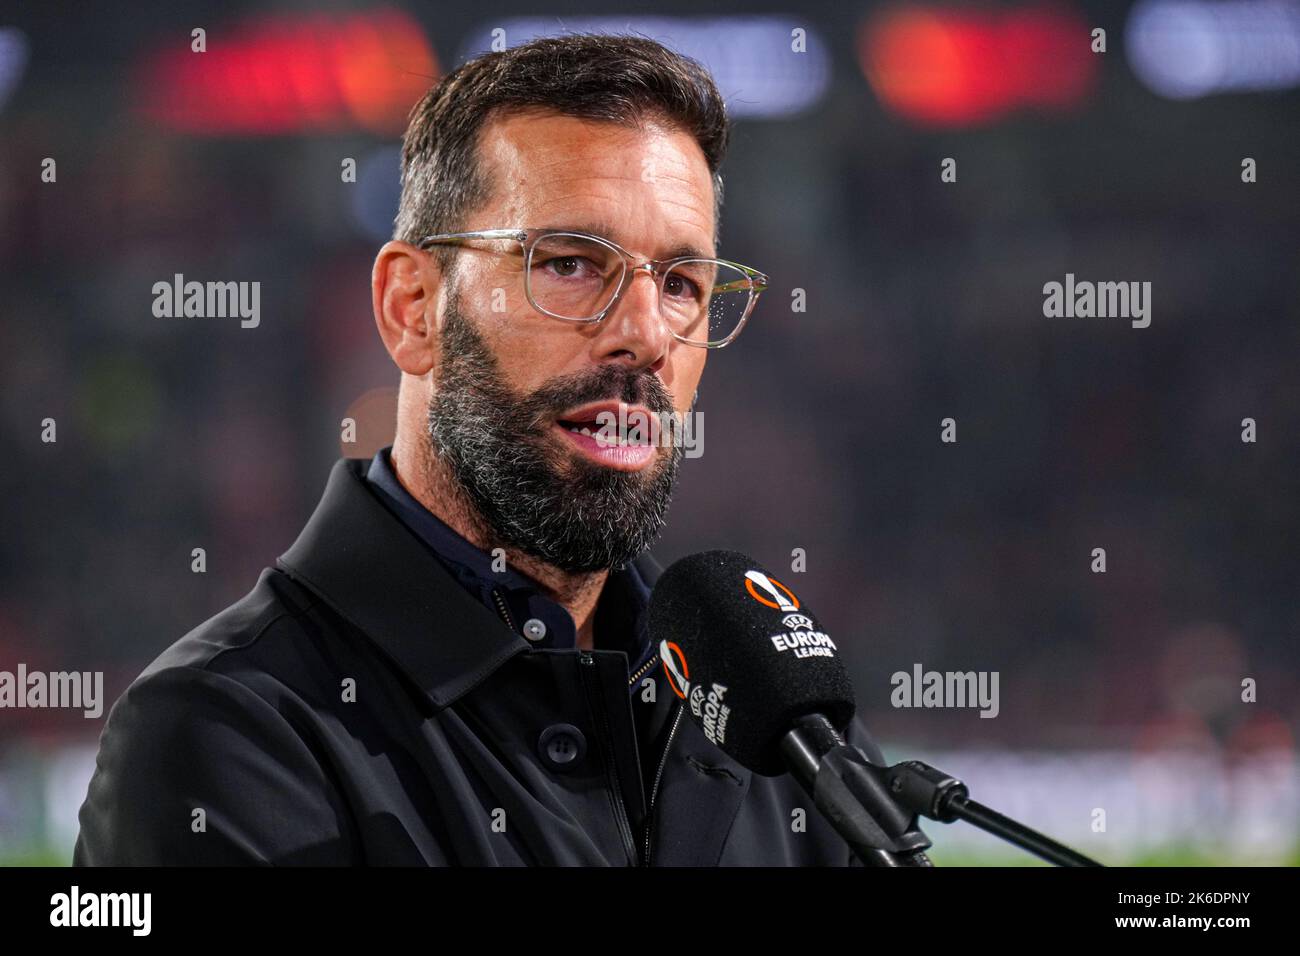 EINDHOVEN, NETHERLANDS - OCTOBER 13: Head Coach Ruud van Nistelrooy of PSV Eindhoven prior to the UEFA Europa League match between PSV Eindhoven and FC Zurich at Philips Stadion on October 13, 2022 in Eindhoven, Netherlands (Photo by Geert van Erven/Orange Pictures) Stock Photo